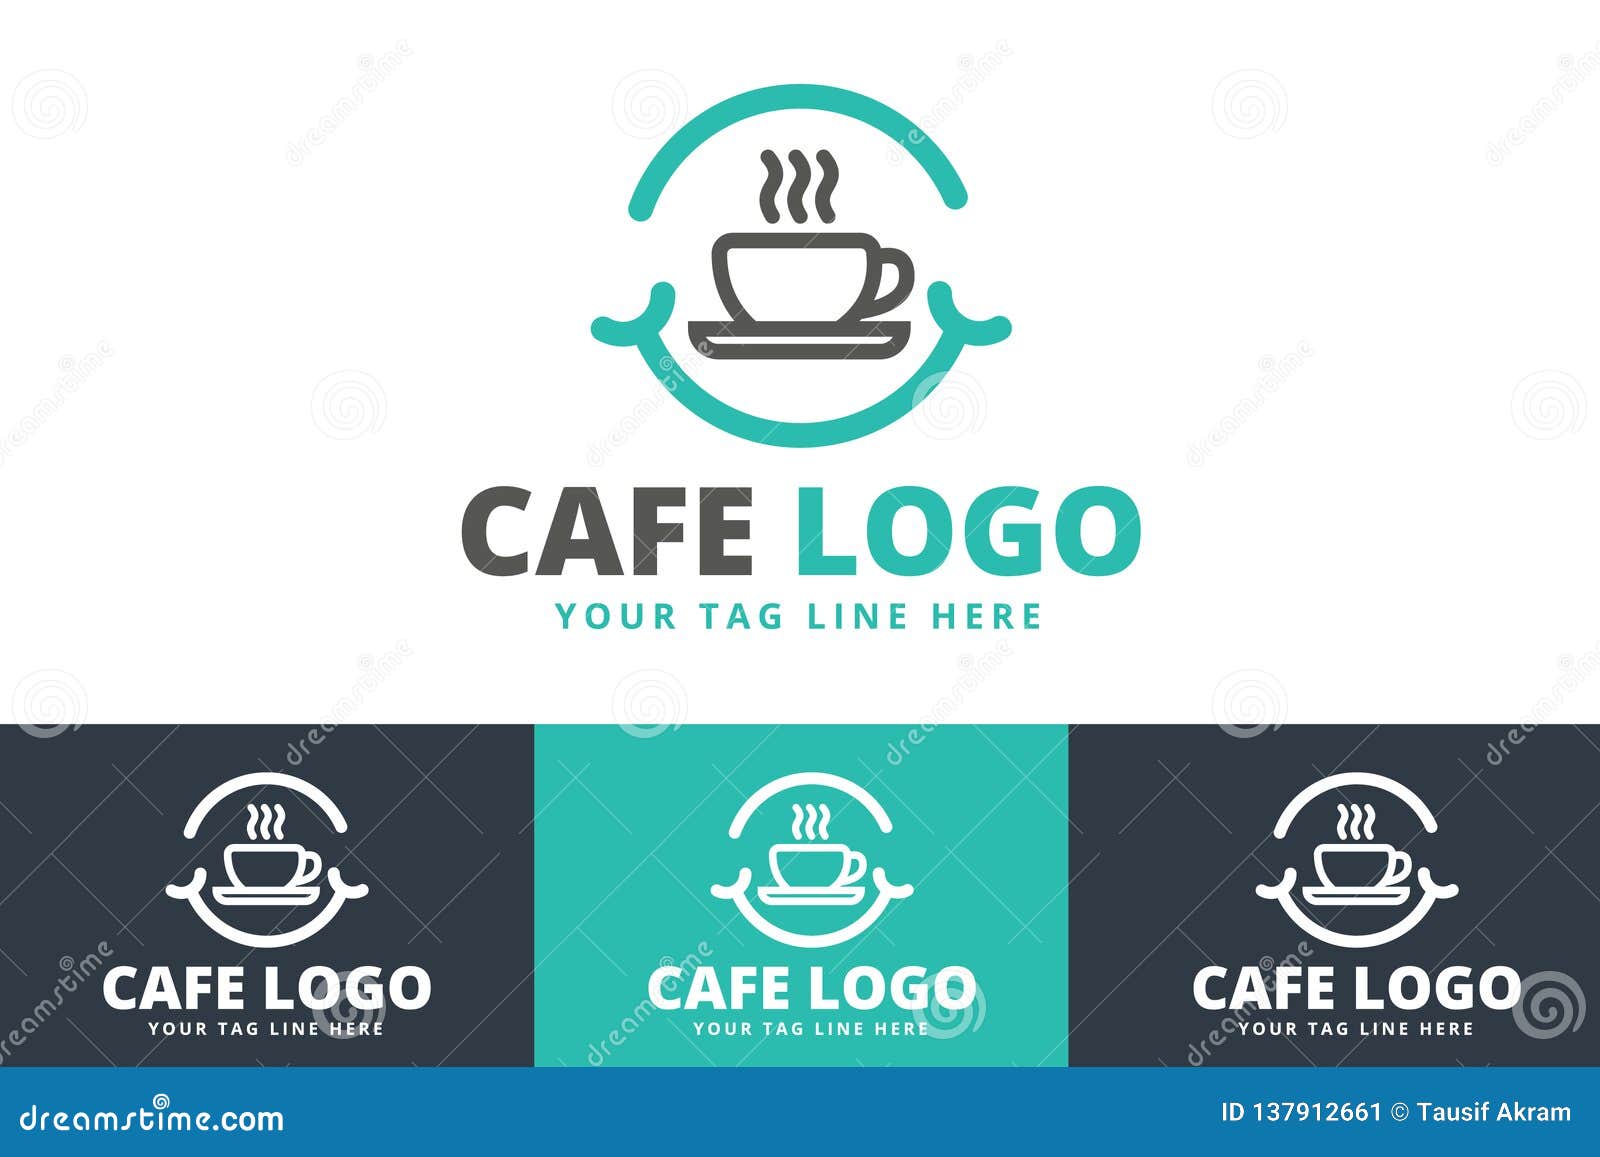 Cafe Logo Design Isolated on White Background Stock Vector - Illustration  of graphic, icon: 137912661